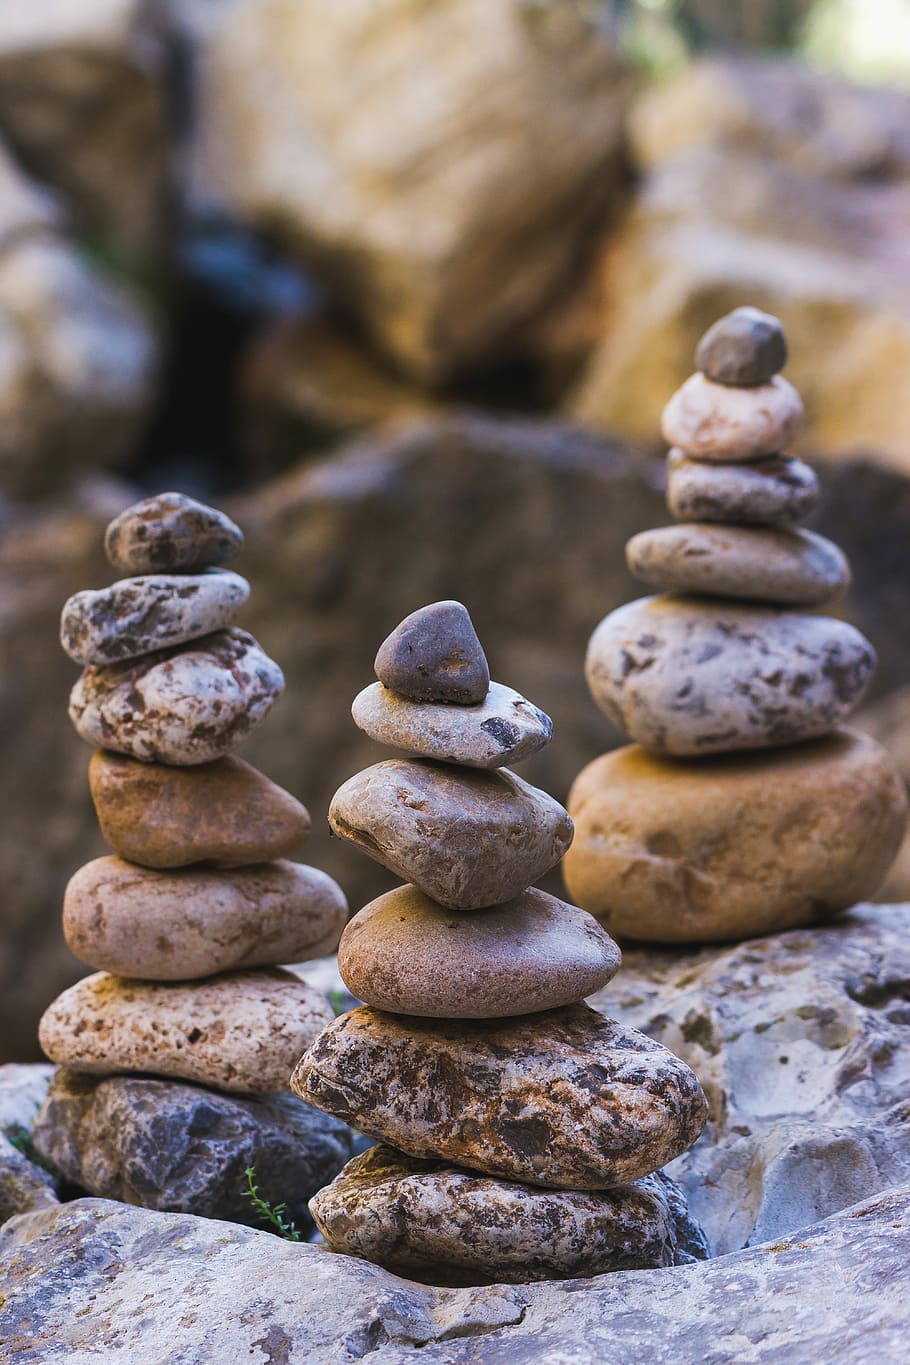 stones, spiritual, balance, stack, stone - object, close-up, solid, rock, pebble, focus on foreground